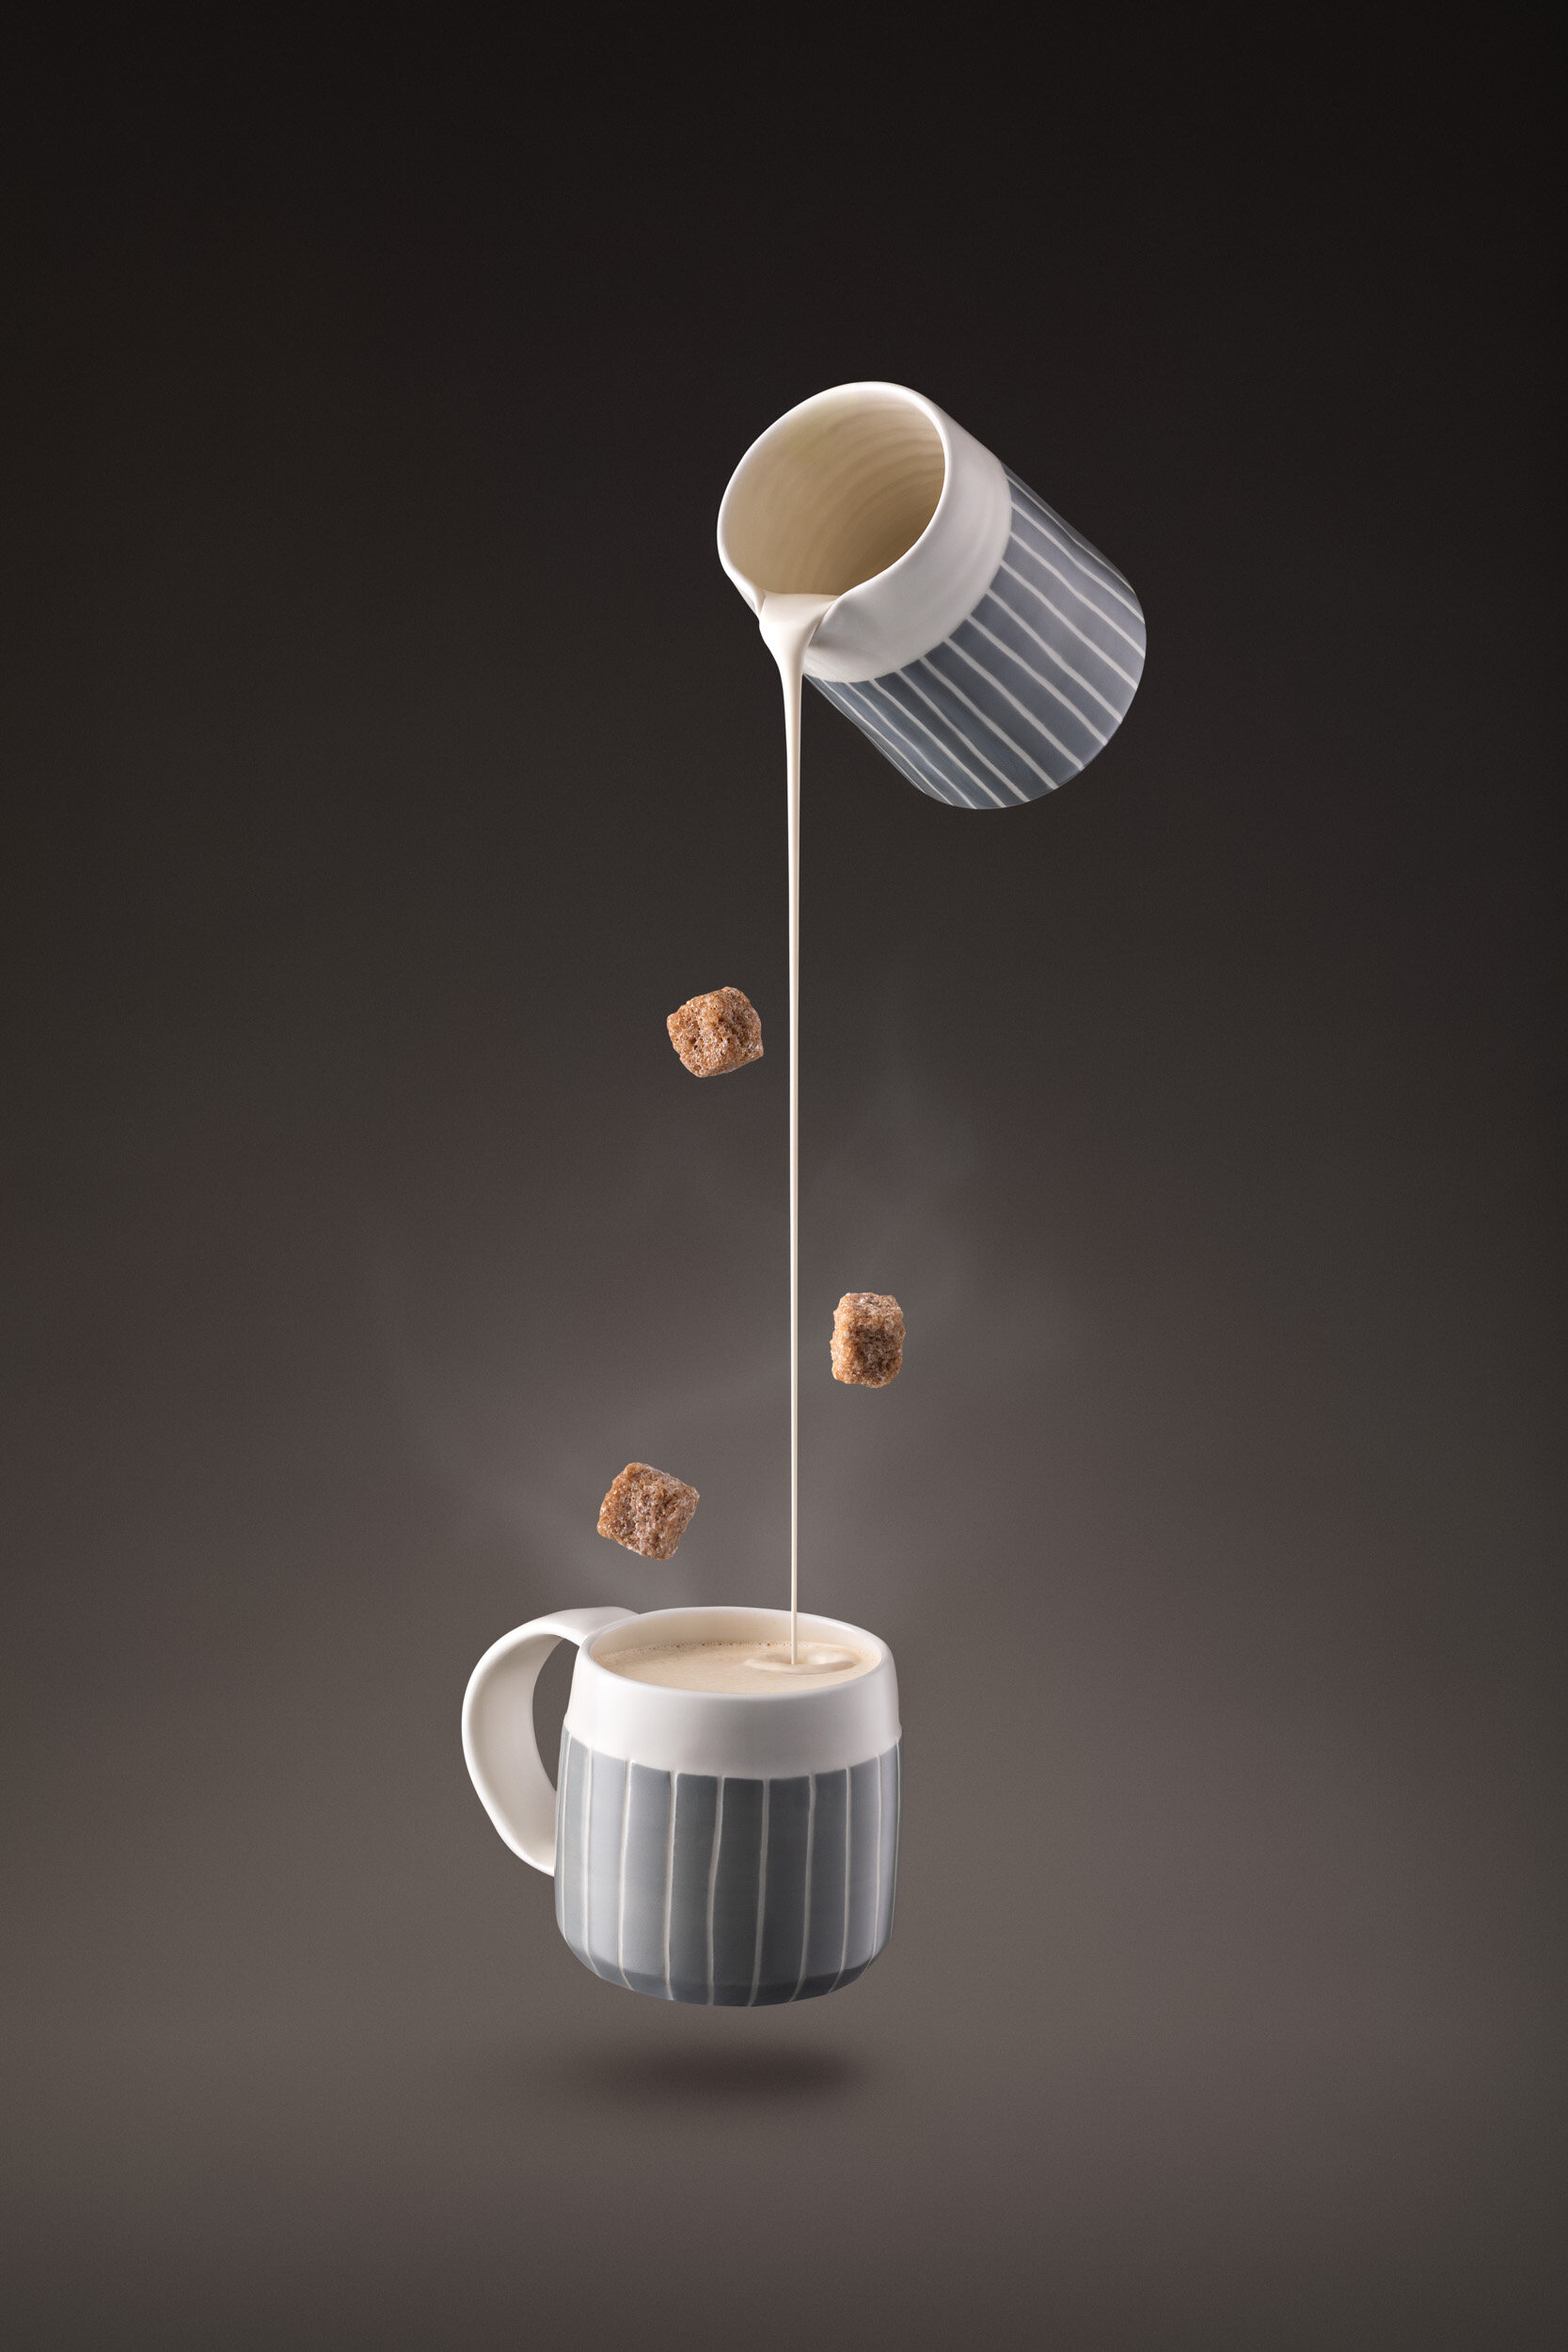 Pouring Milk into Coffee Cup | Commercial Product Shot  (Copy)